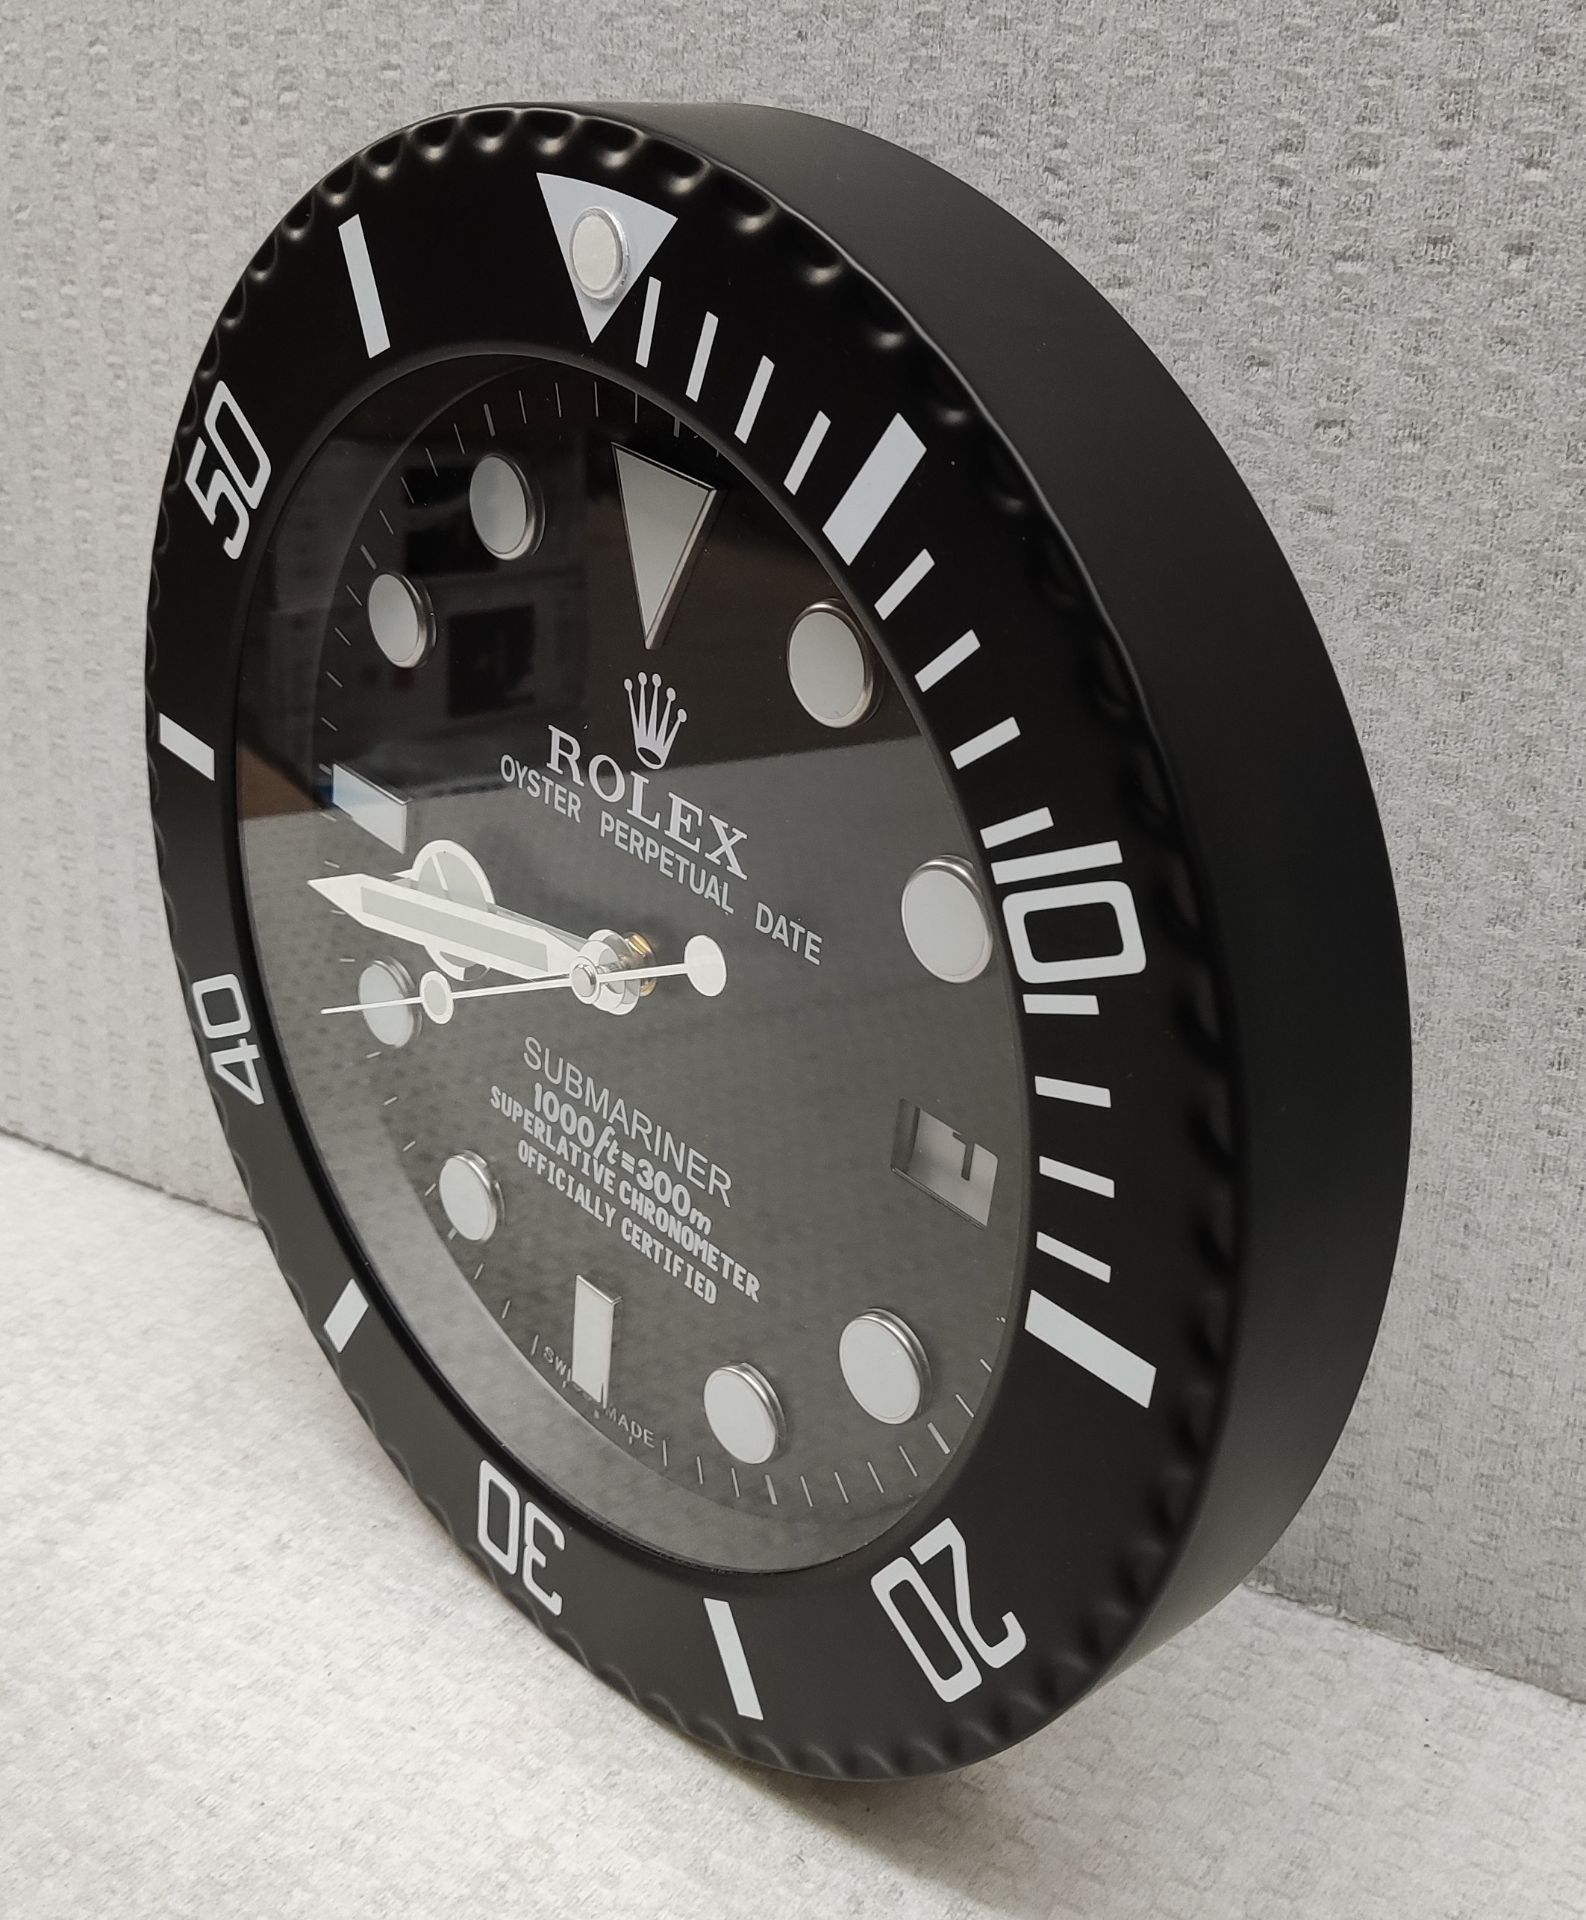 1 x Rolex Submariner Dealer Only Wall Clock - CL444 - Location: Altrincham WA14 Fully working and in - Image 4 of 13